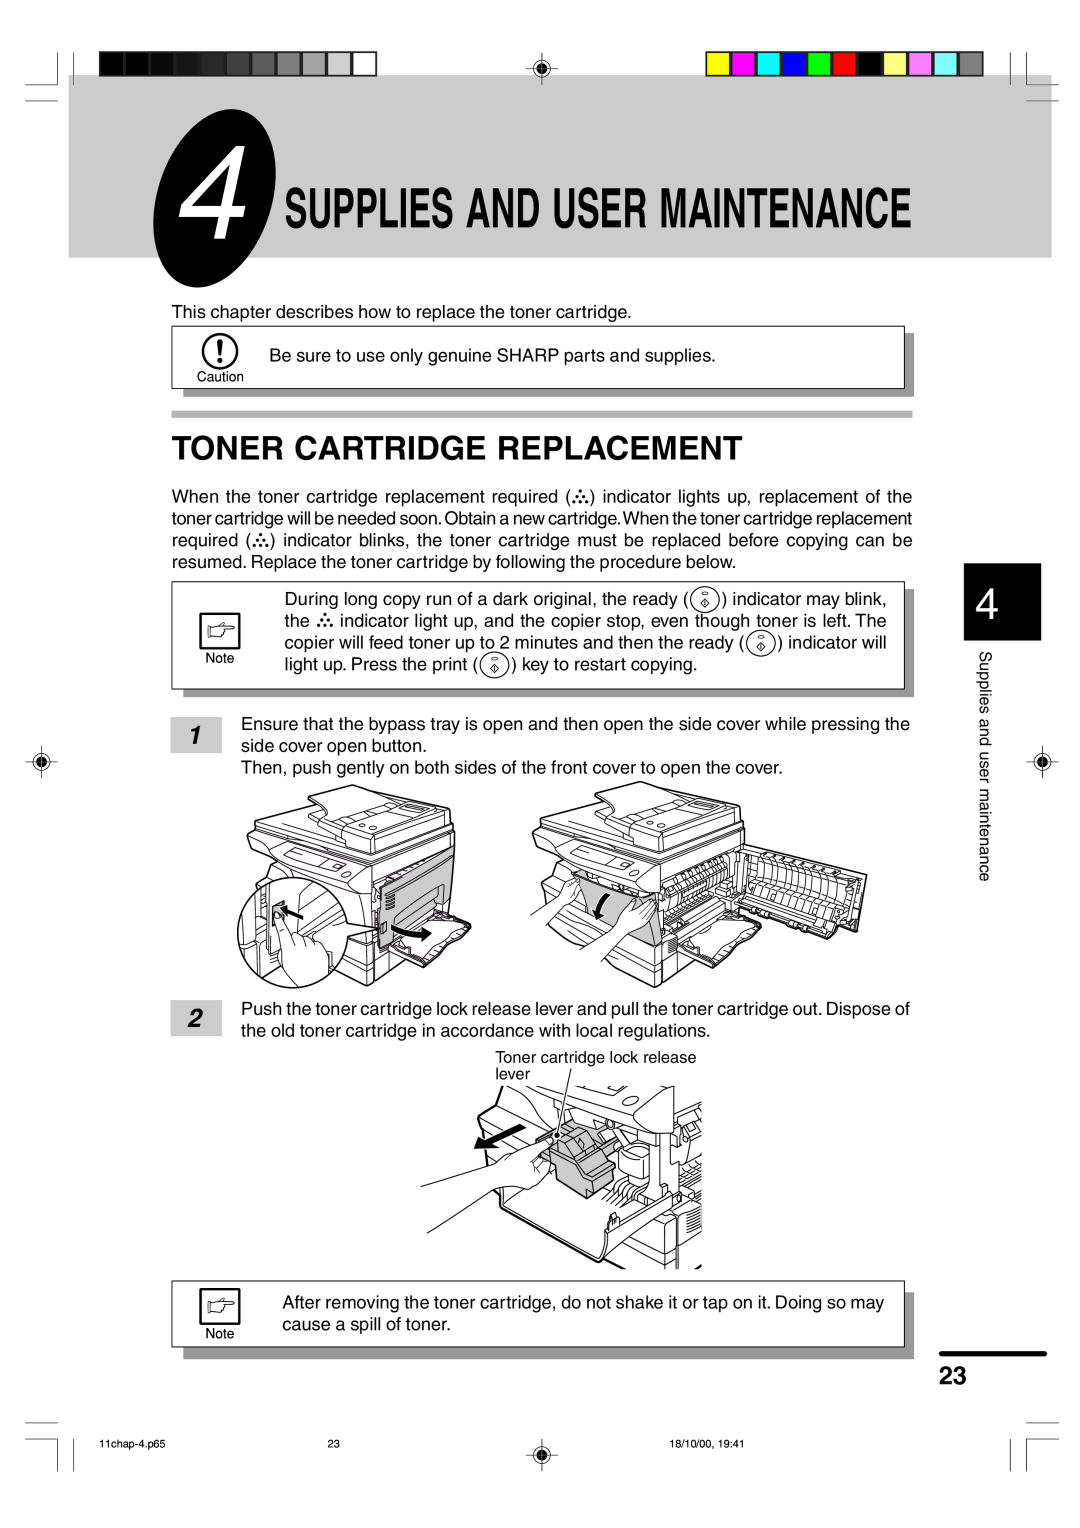 Sharp AR-F152 operation manual Toner Cartridge Replacement, Supplies And User Maintenance 